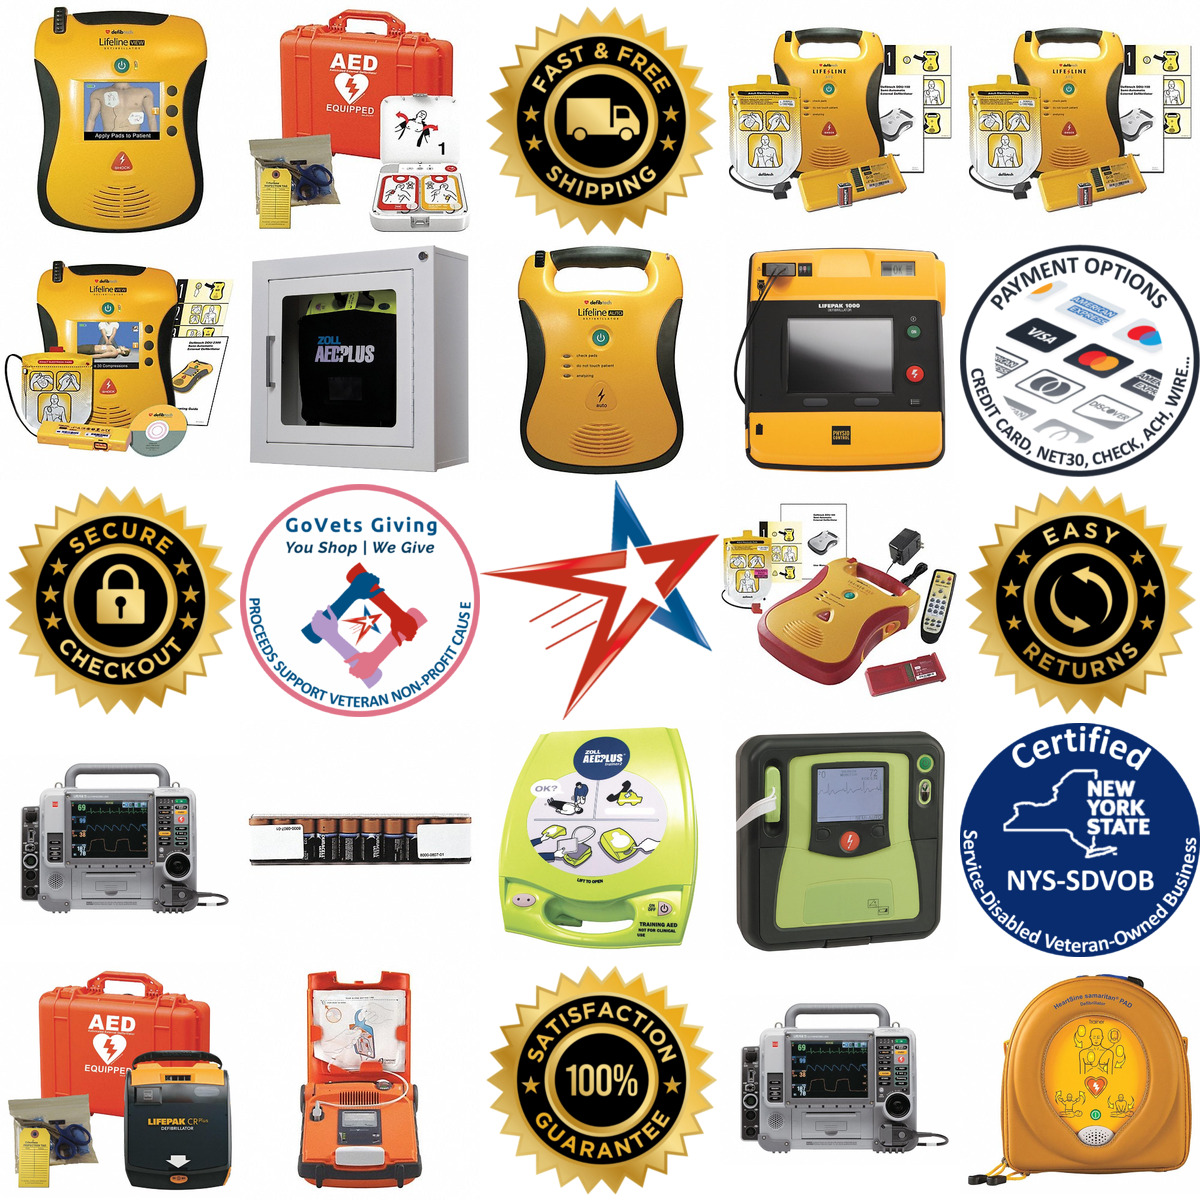 A selection of Defibrillators products on GoVets